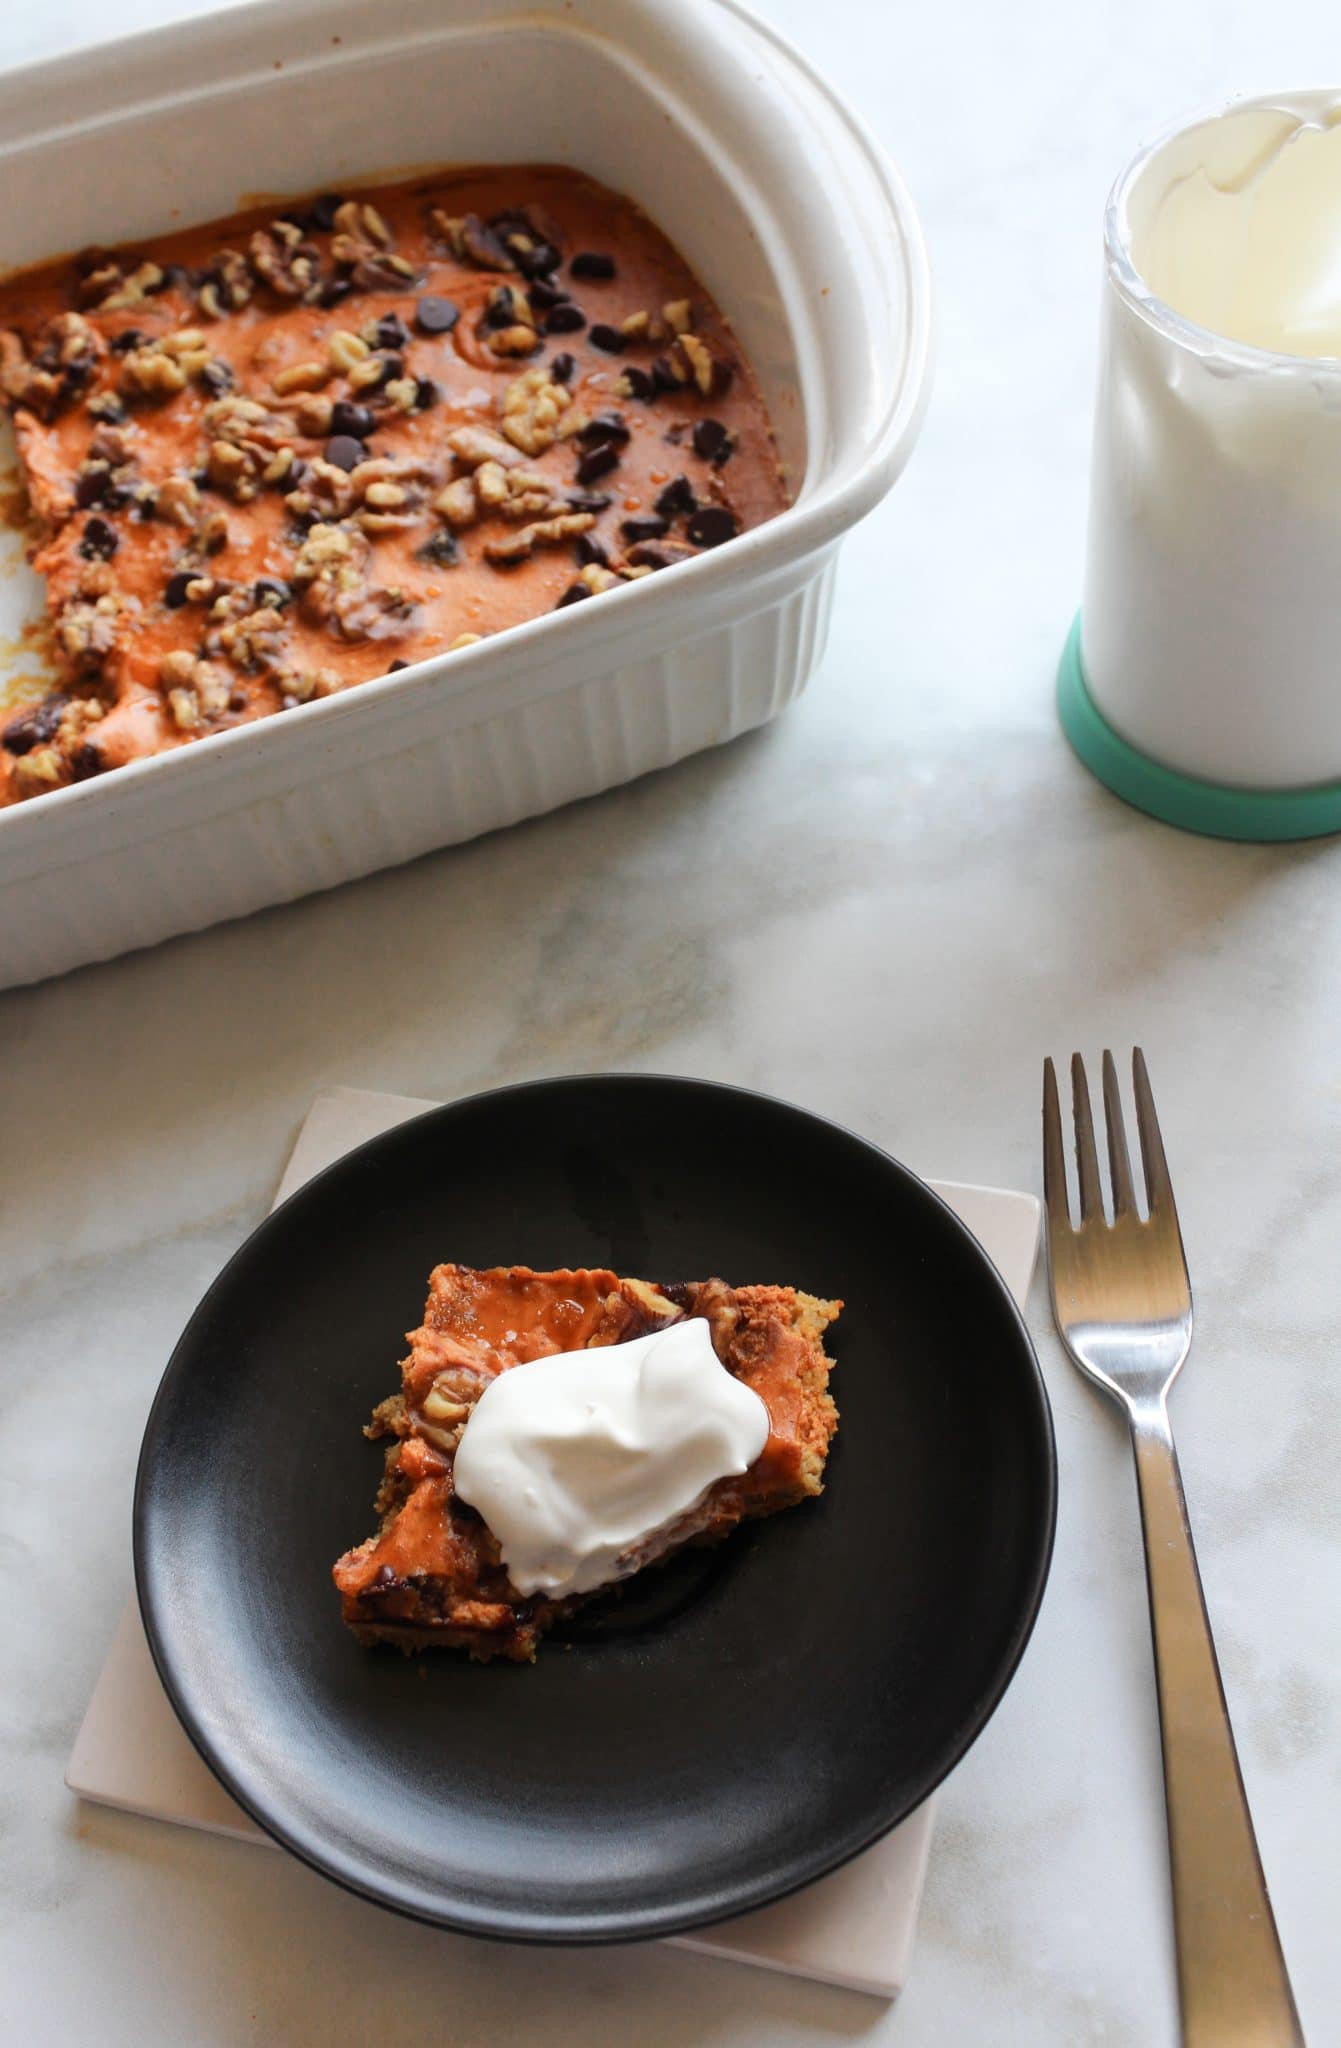 These Chocolate Chip Pumpkin Pie bars are a easy dessert recipe to enjoy with family and friends this fall.